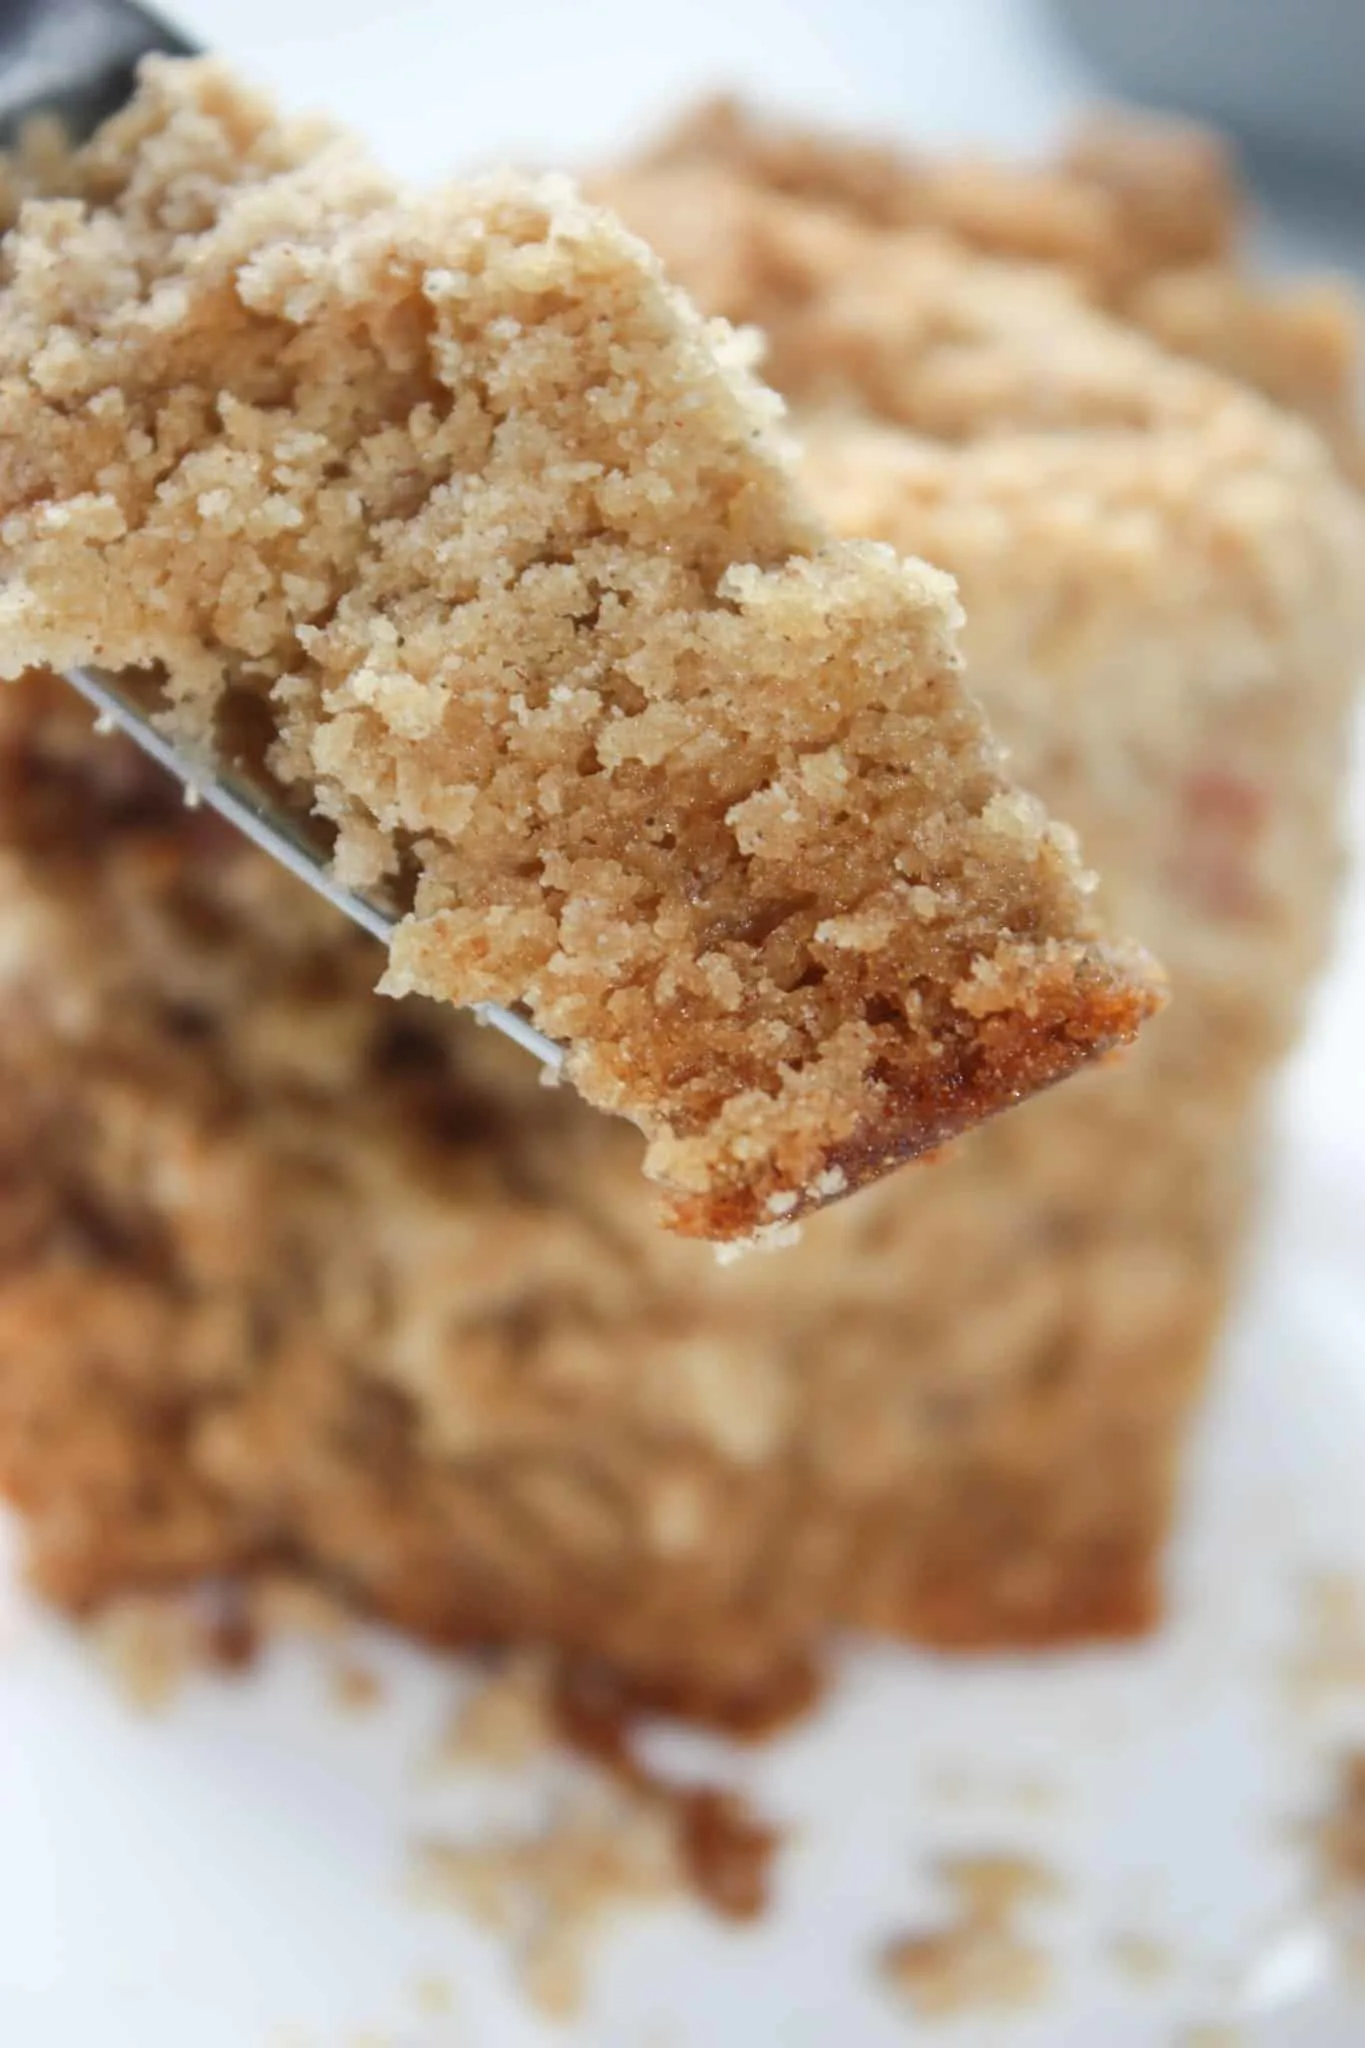 Rhubarb Streusel Coffee Cake provides another opportunity to use up some of this seasonal vegetable if you have your own healthy patch growing!  This gluten free cake is loaded with fresh rhubarb.